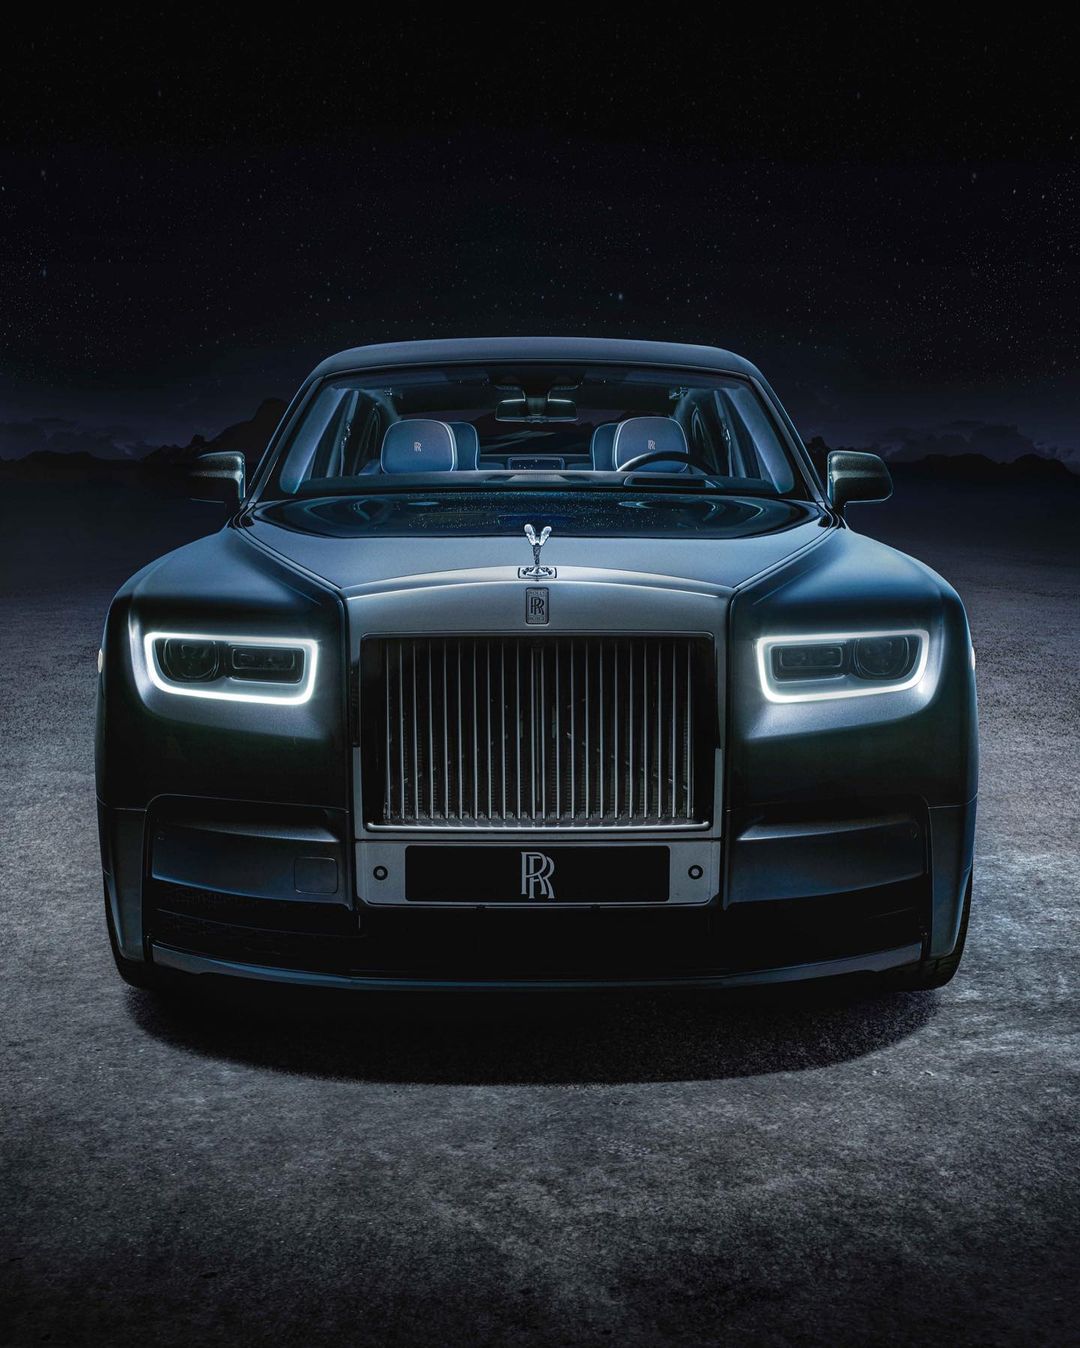 One of the top publications of @rollsroycecarseurope which has 28K likes and 96 comments